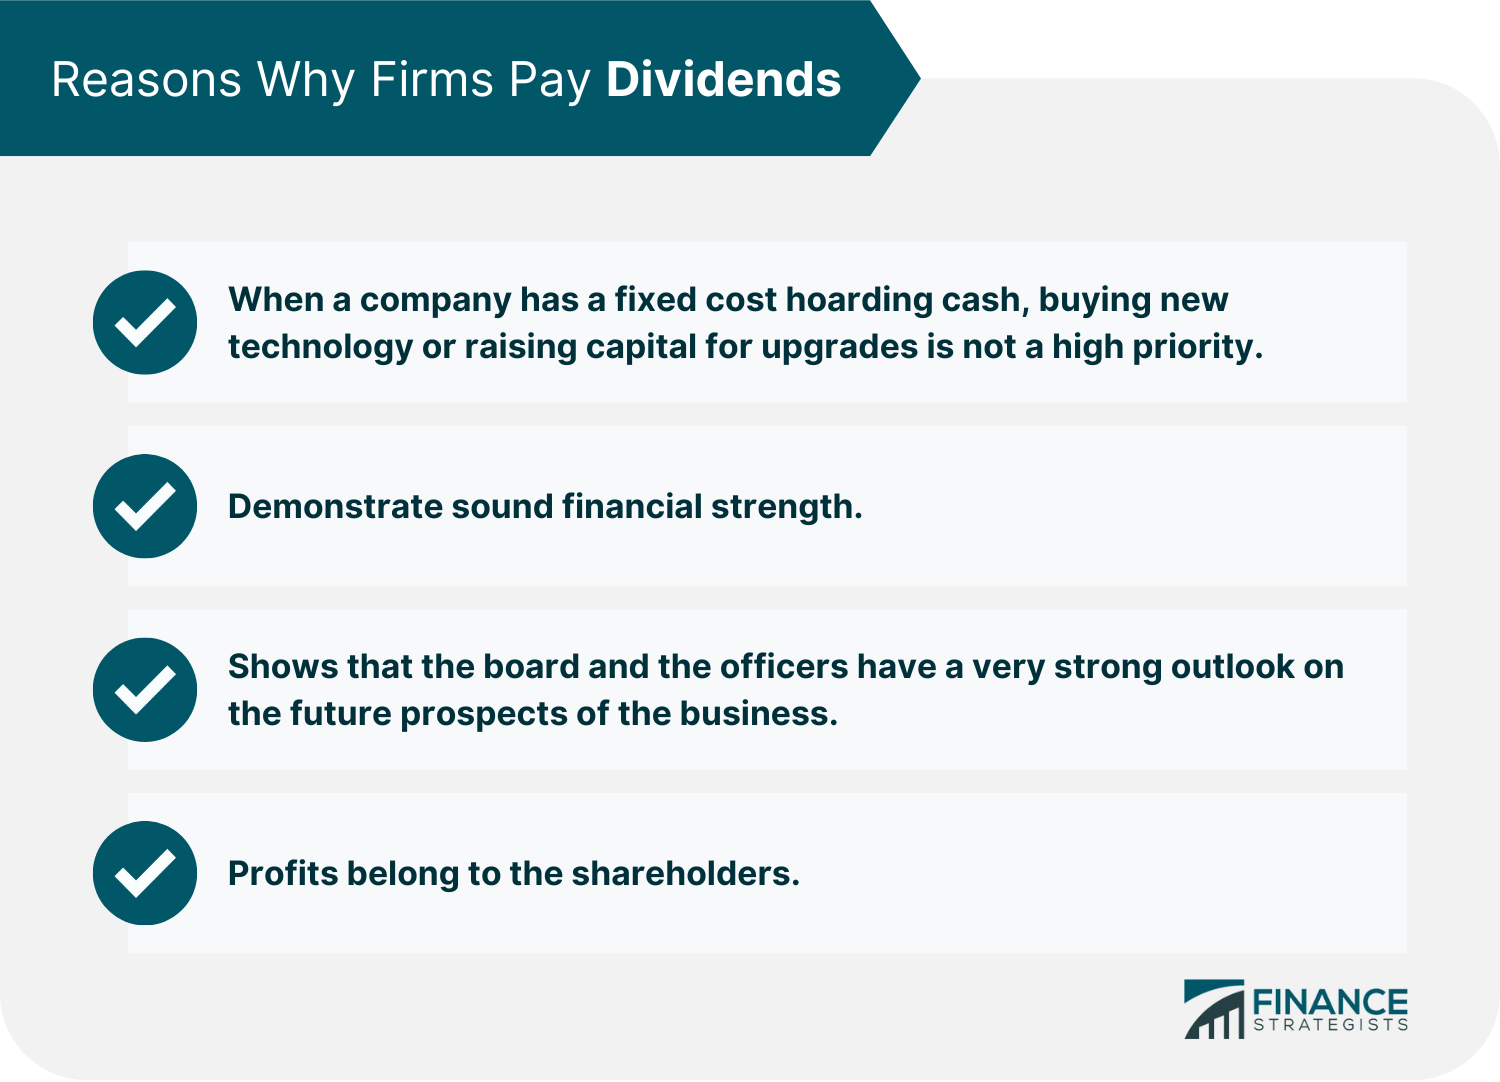 Reasons Why Firms Pay Dividends